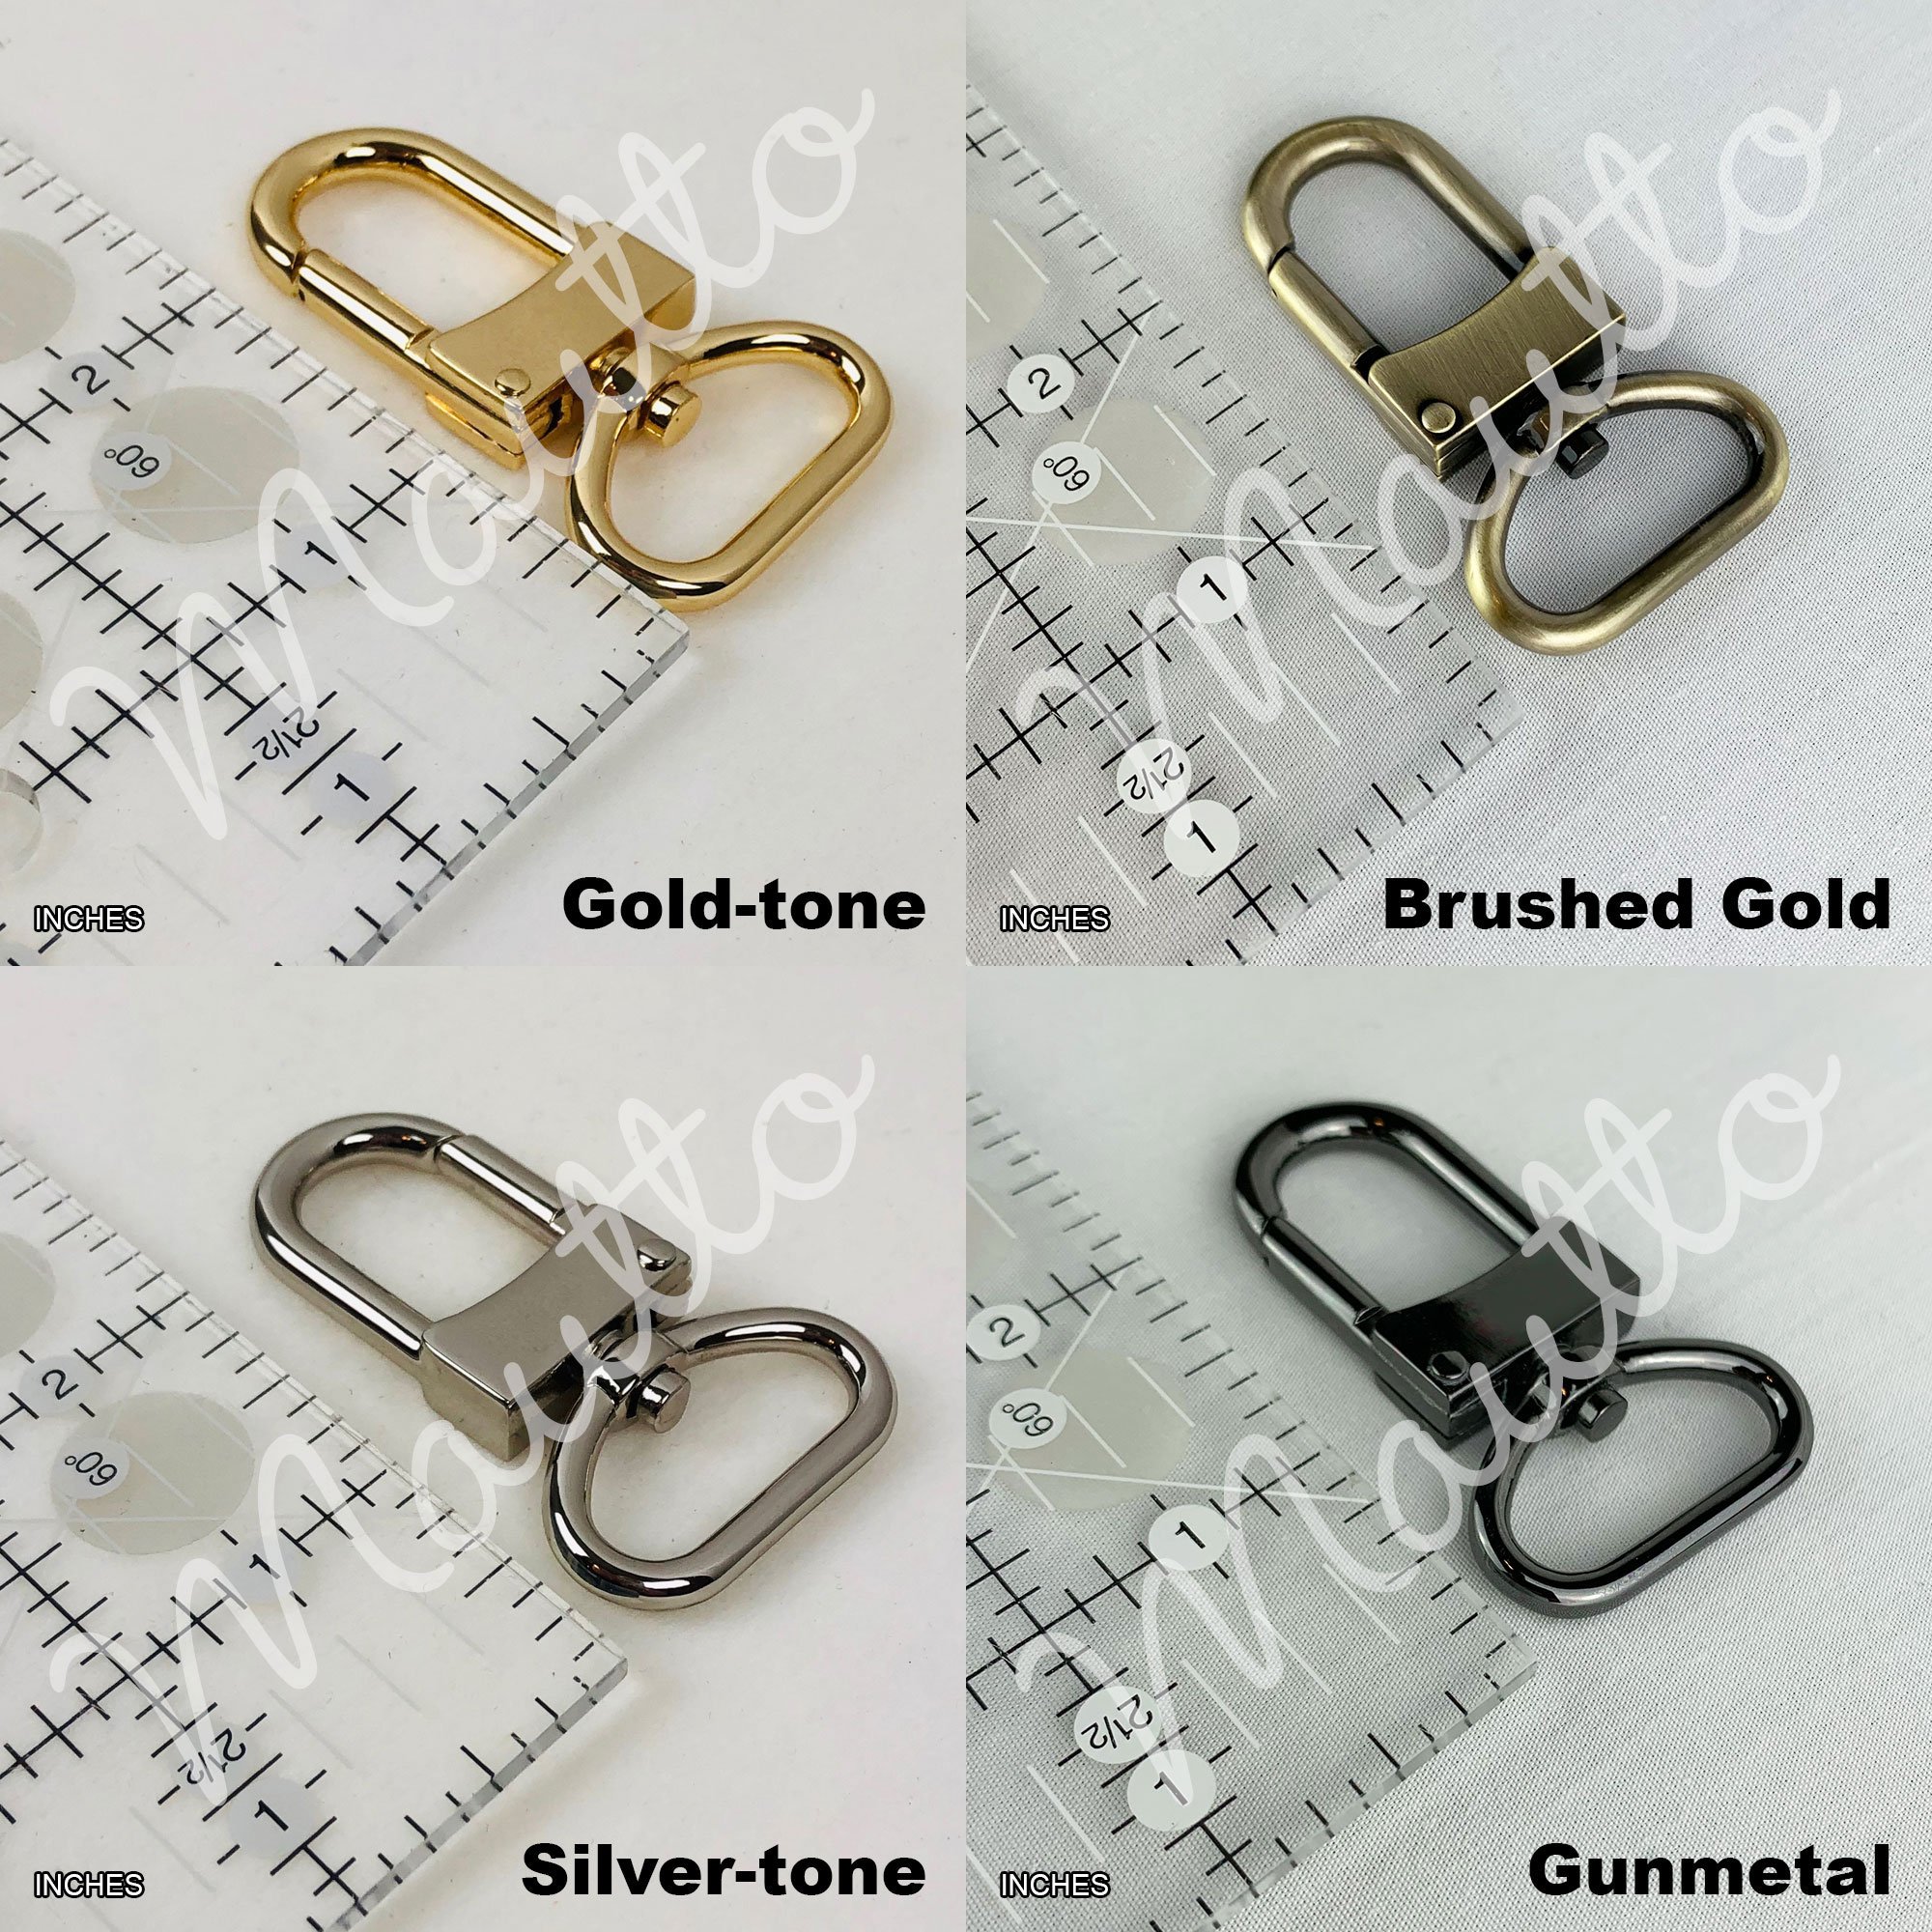 Strap Extender for Purses and Bags - Large Clip for Bags with Thick  Hardware - Heavy Duty Gold-tone Chain & Swiveling Clip